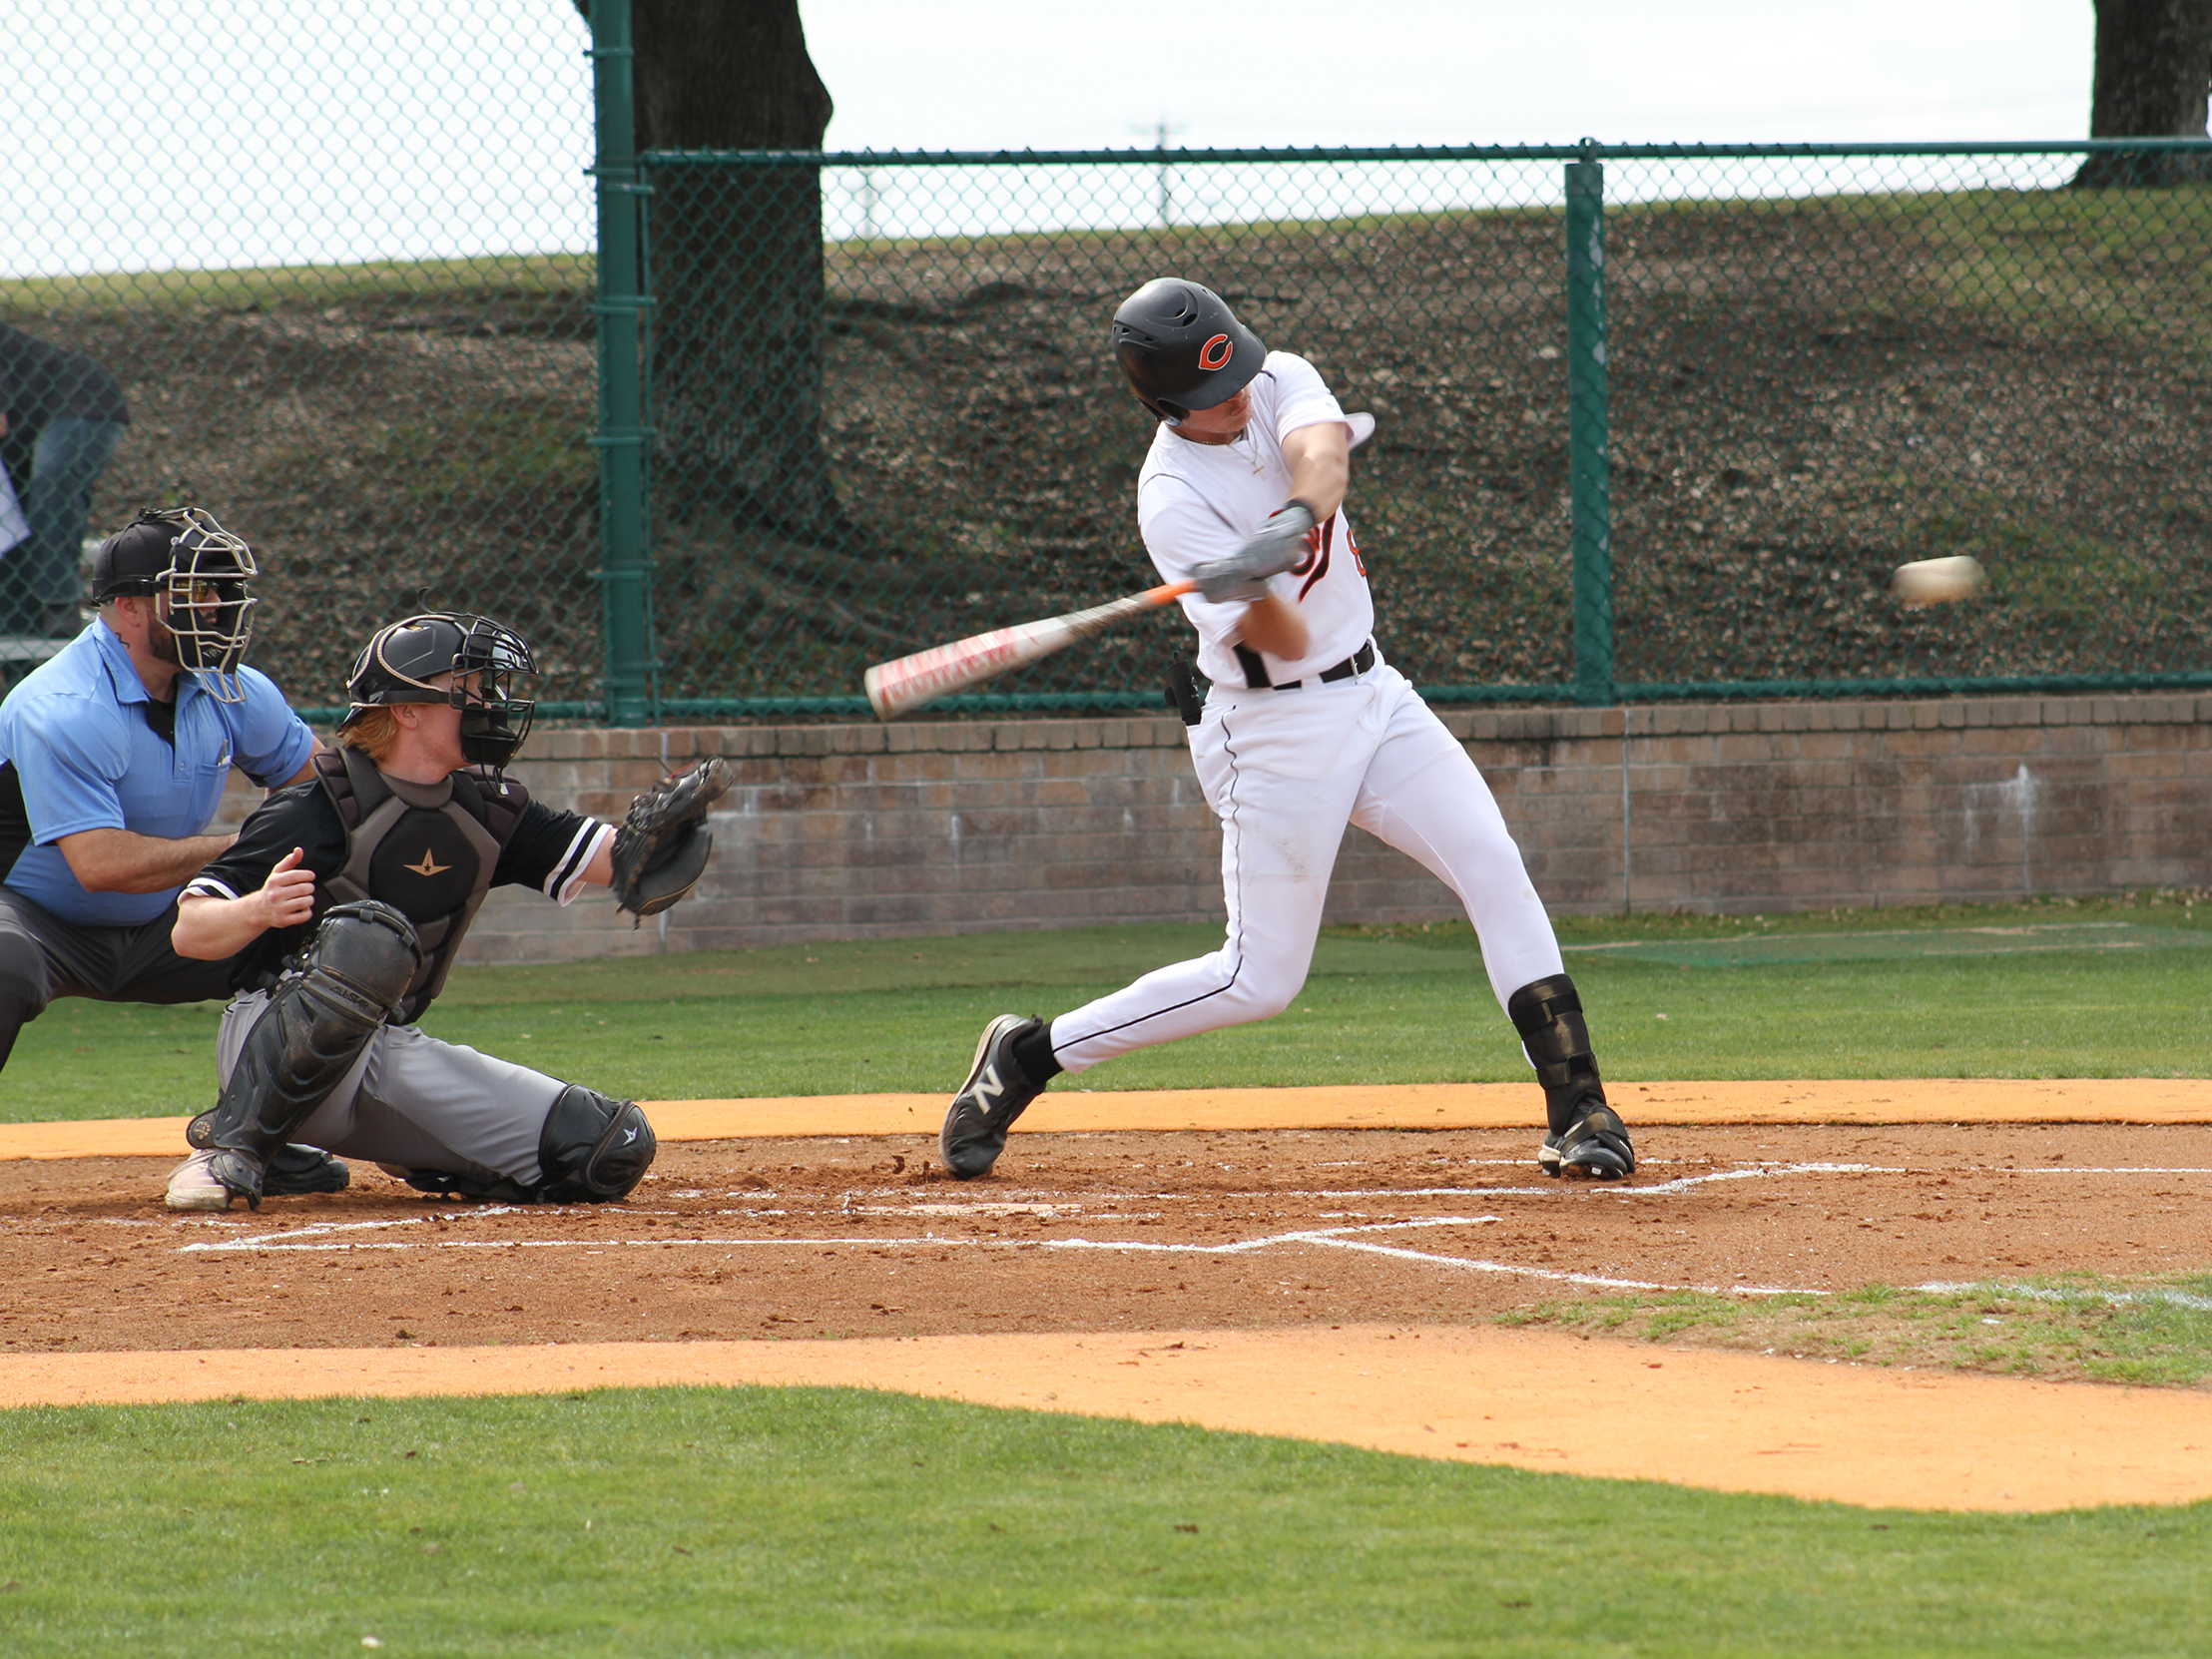 Suns Sweep Doubleheader to Take Series with Hesston